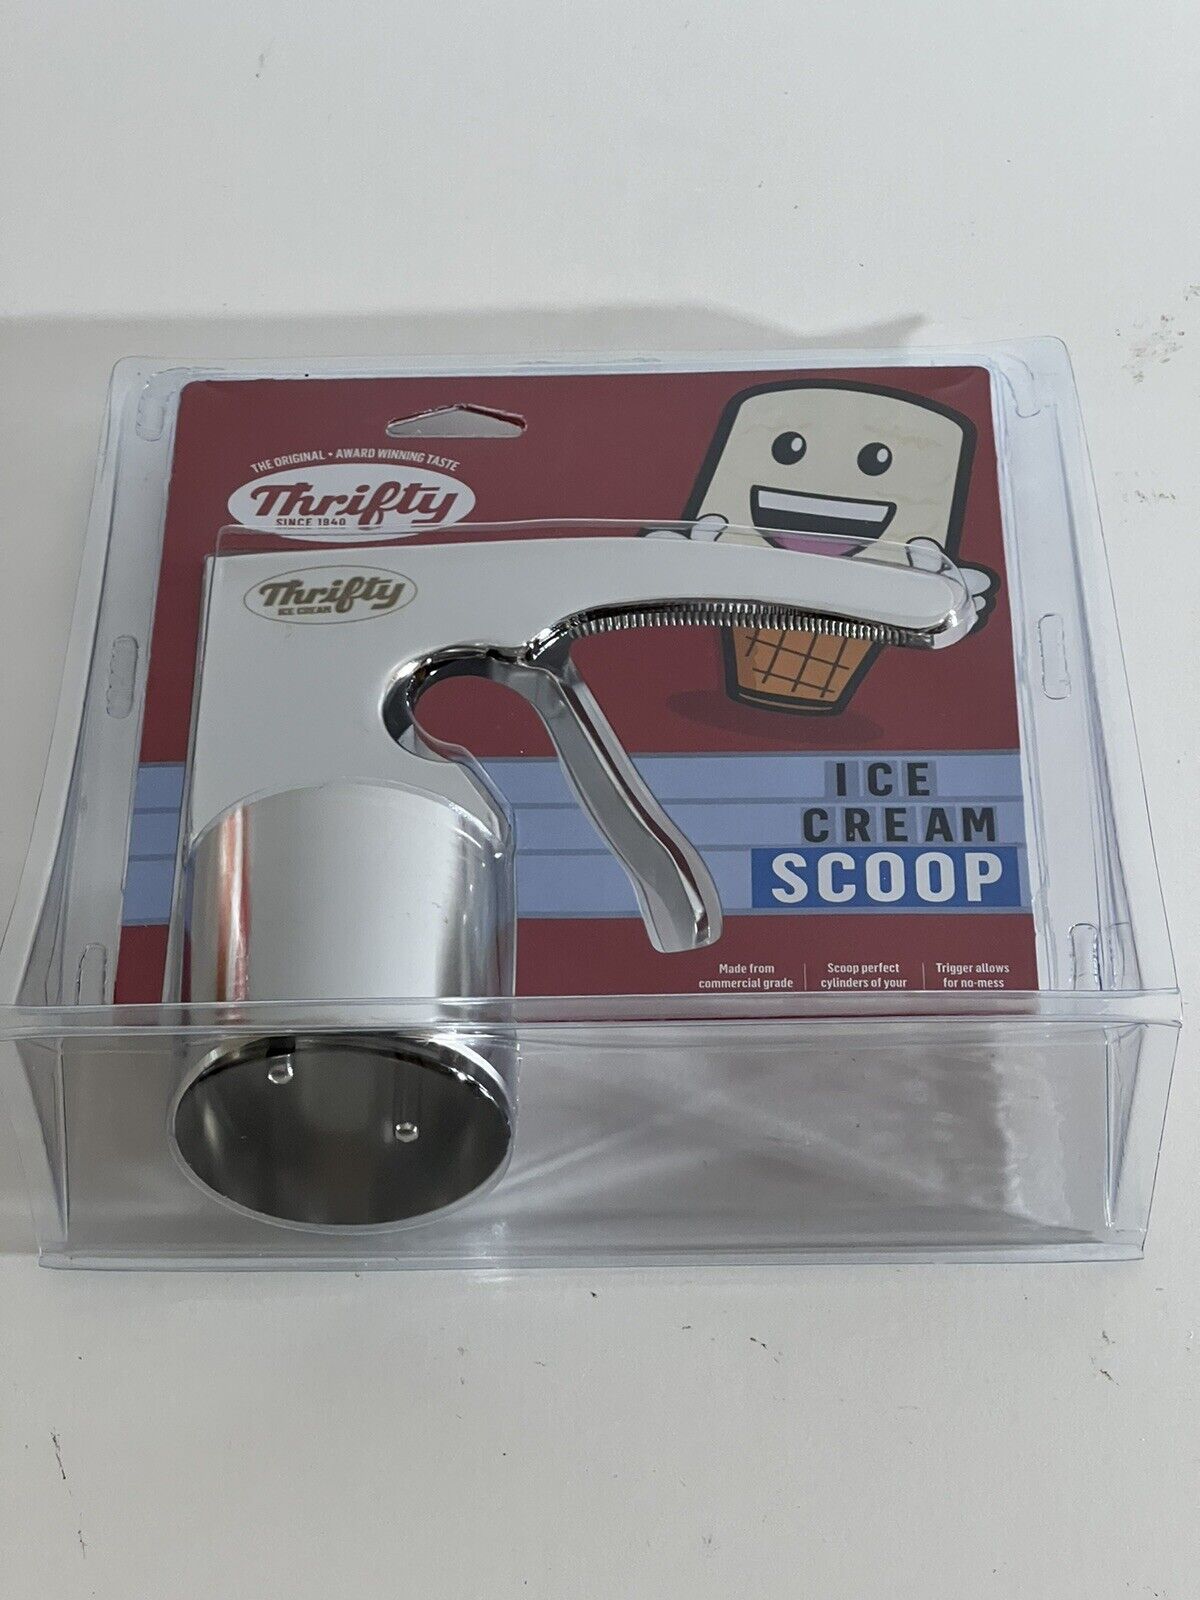 Thrifty Limited Edition Rite Aid Holiday Ice Cream Scooper.